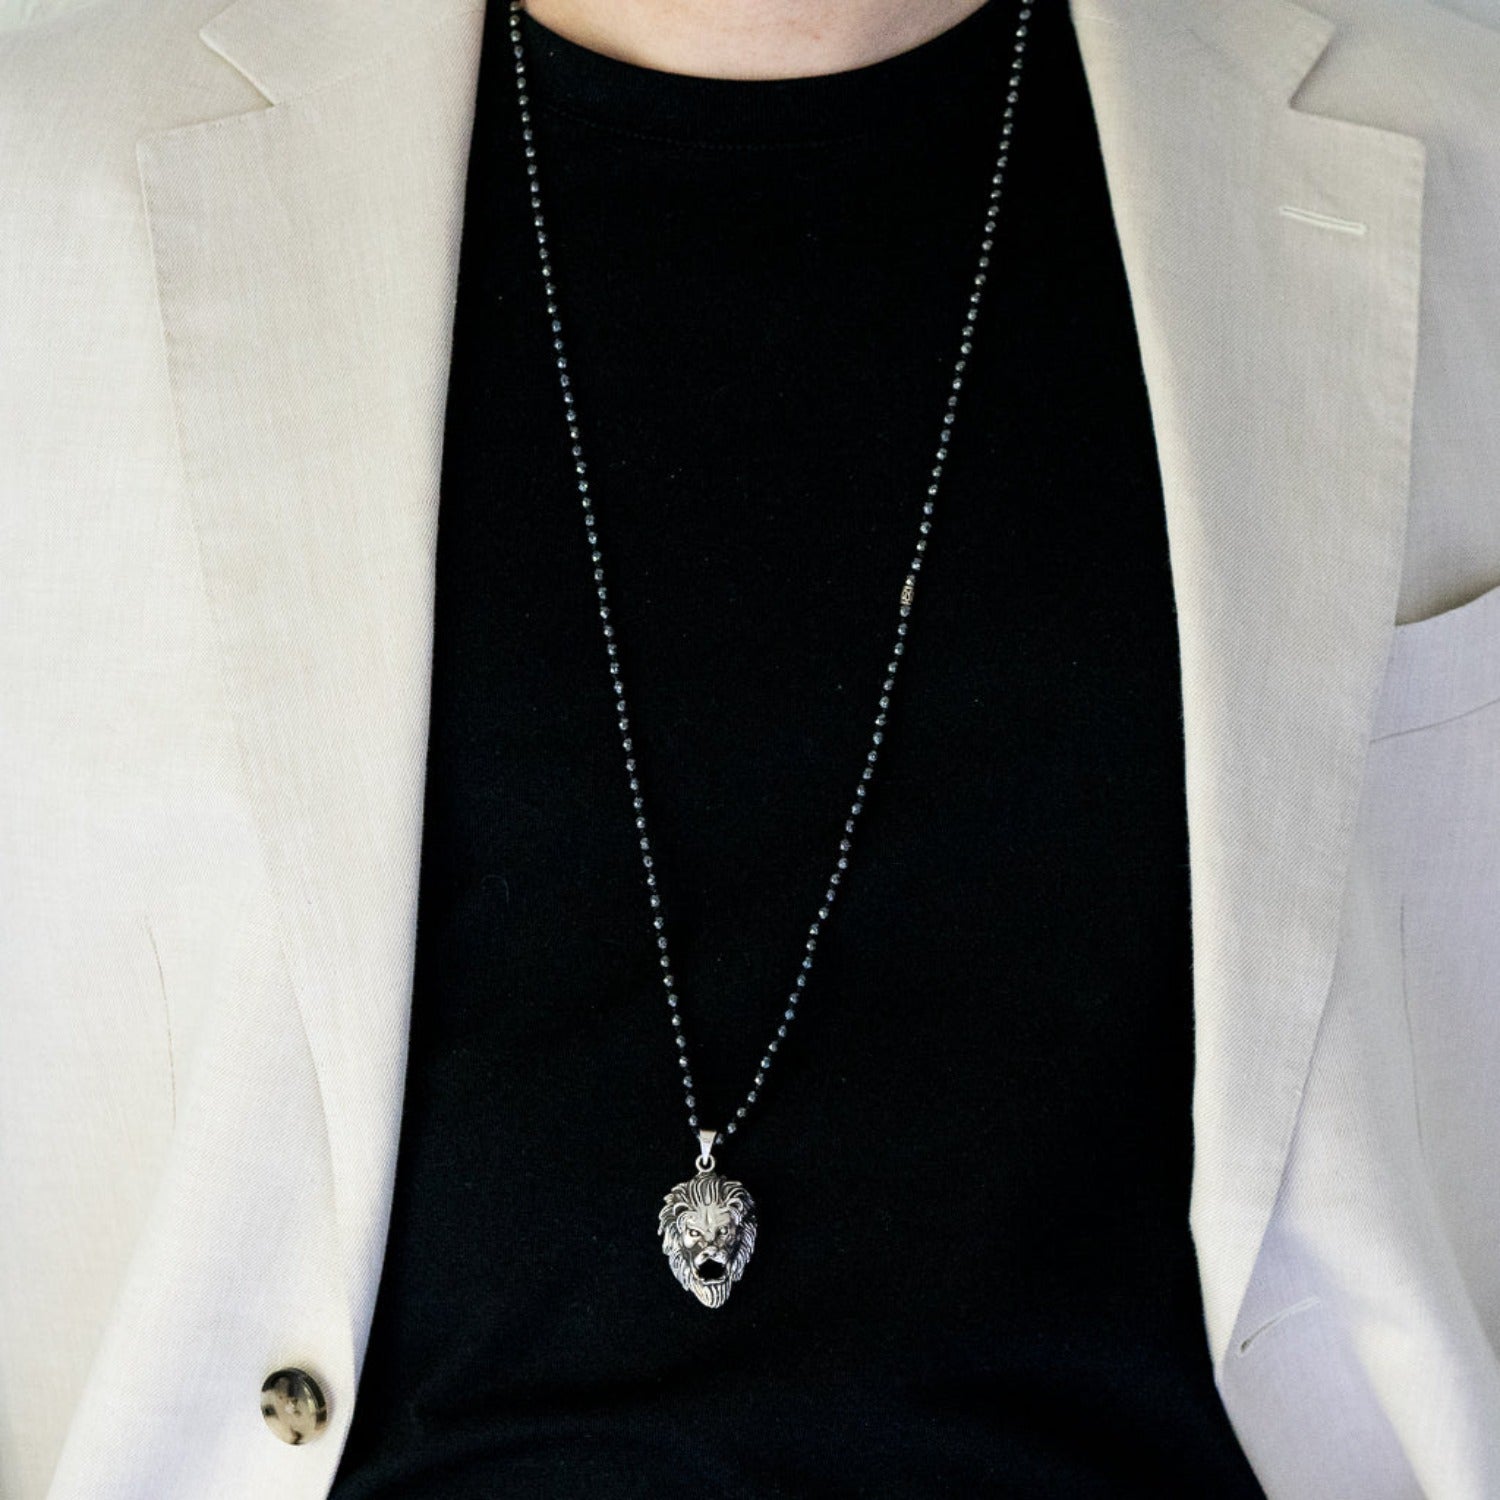 Confident and Stylish - Model wearing Silver Leo Necklace.